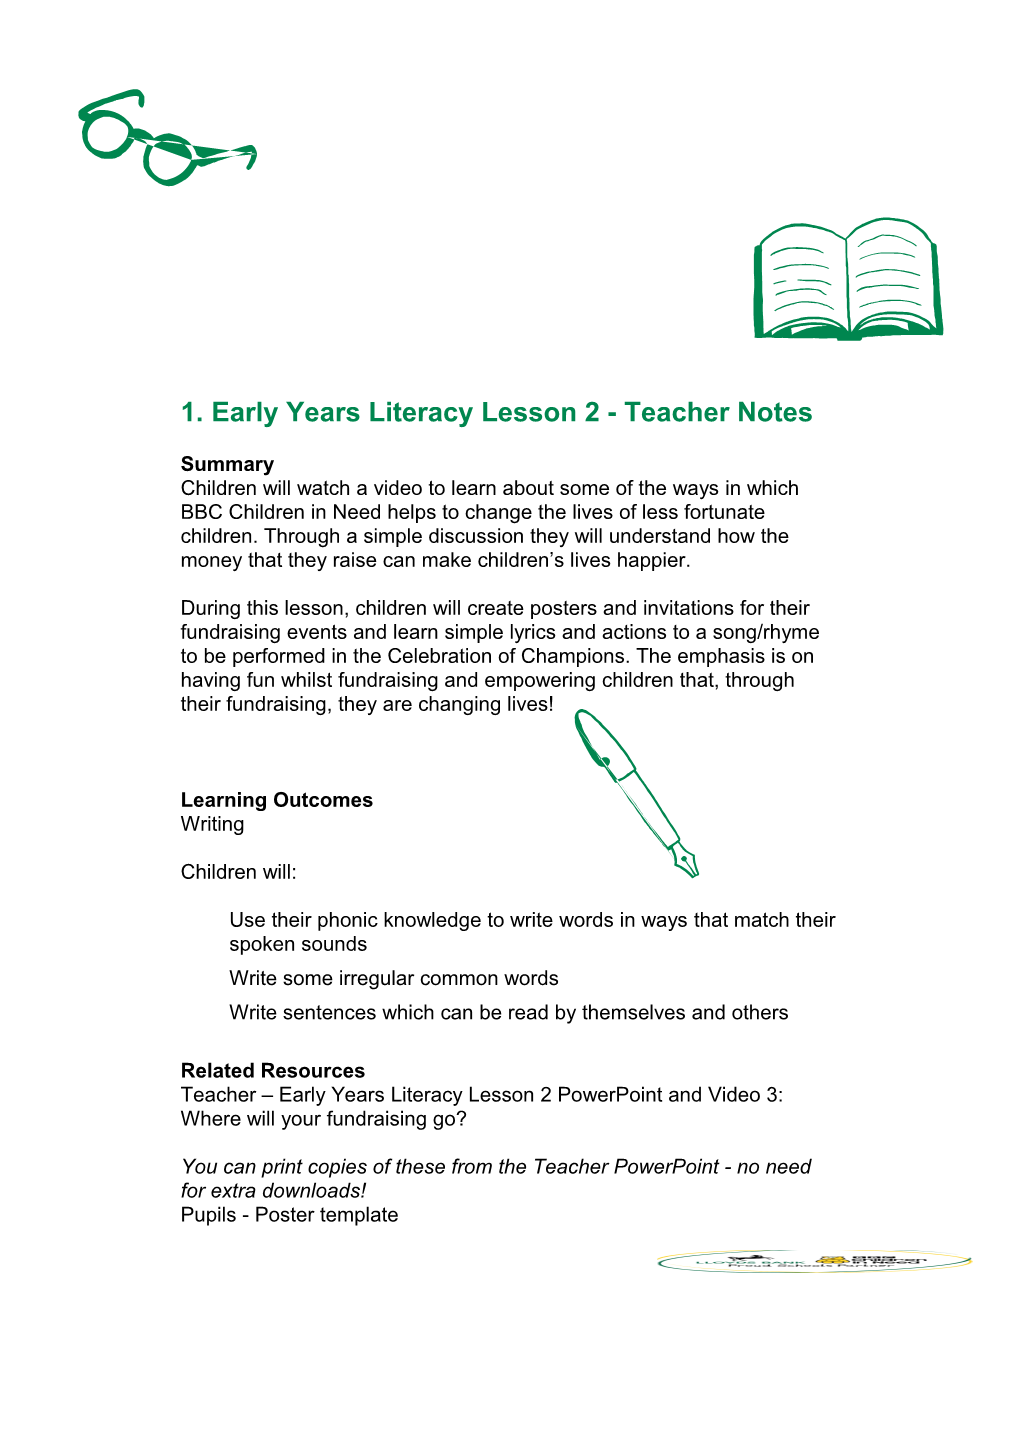 Early Years Literacy Lesson 2 - Teacher Notes